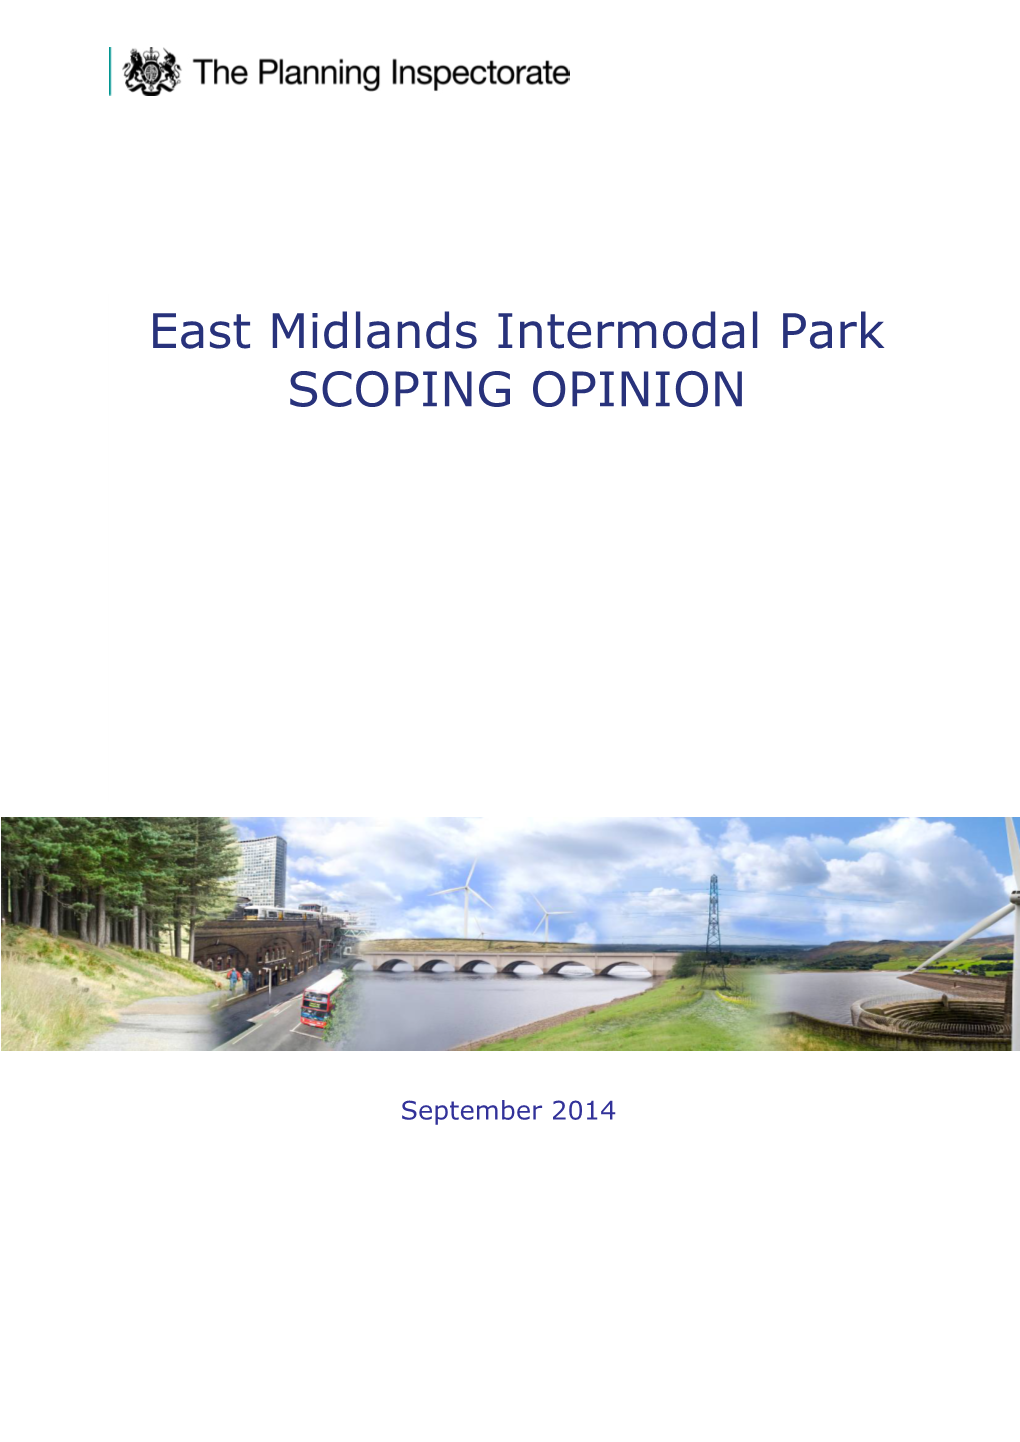 East Midlands Intermodal Park SCOPING OPINION